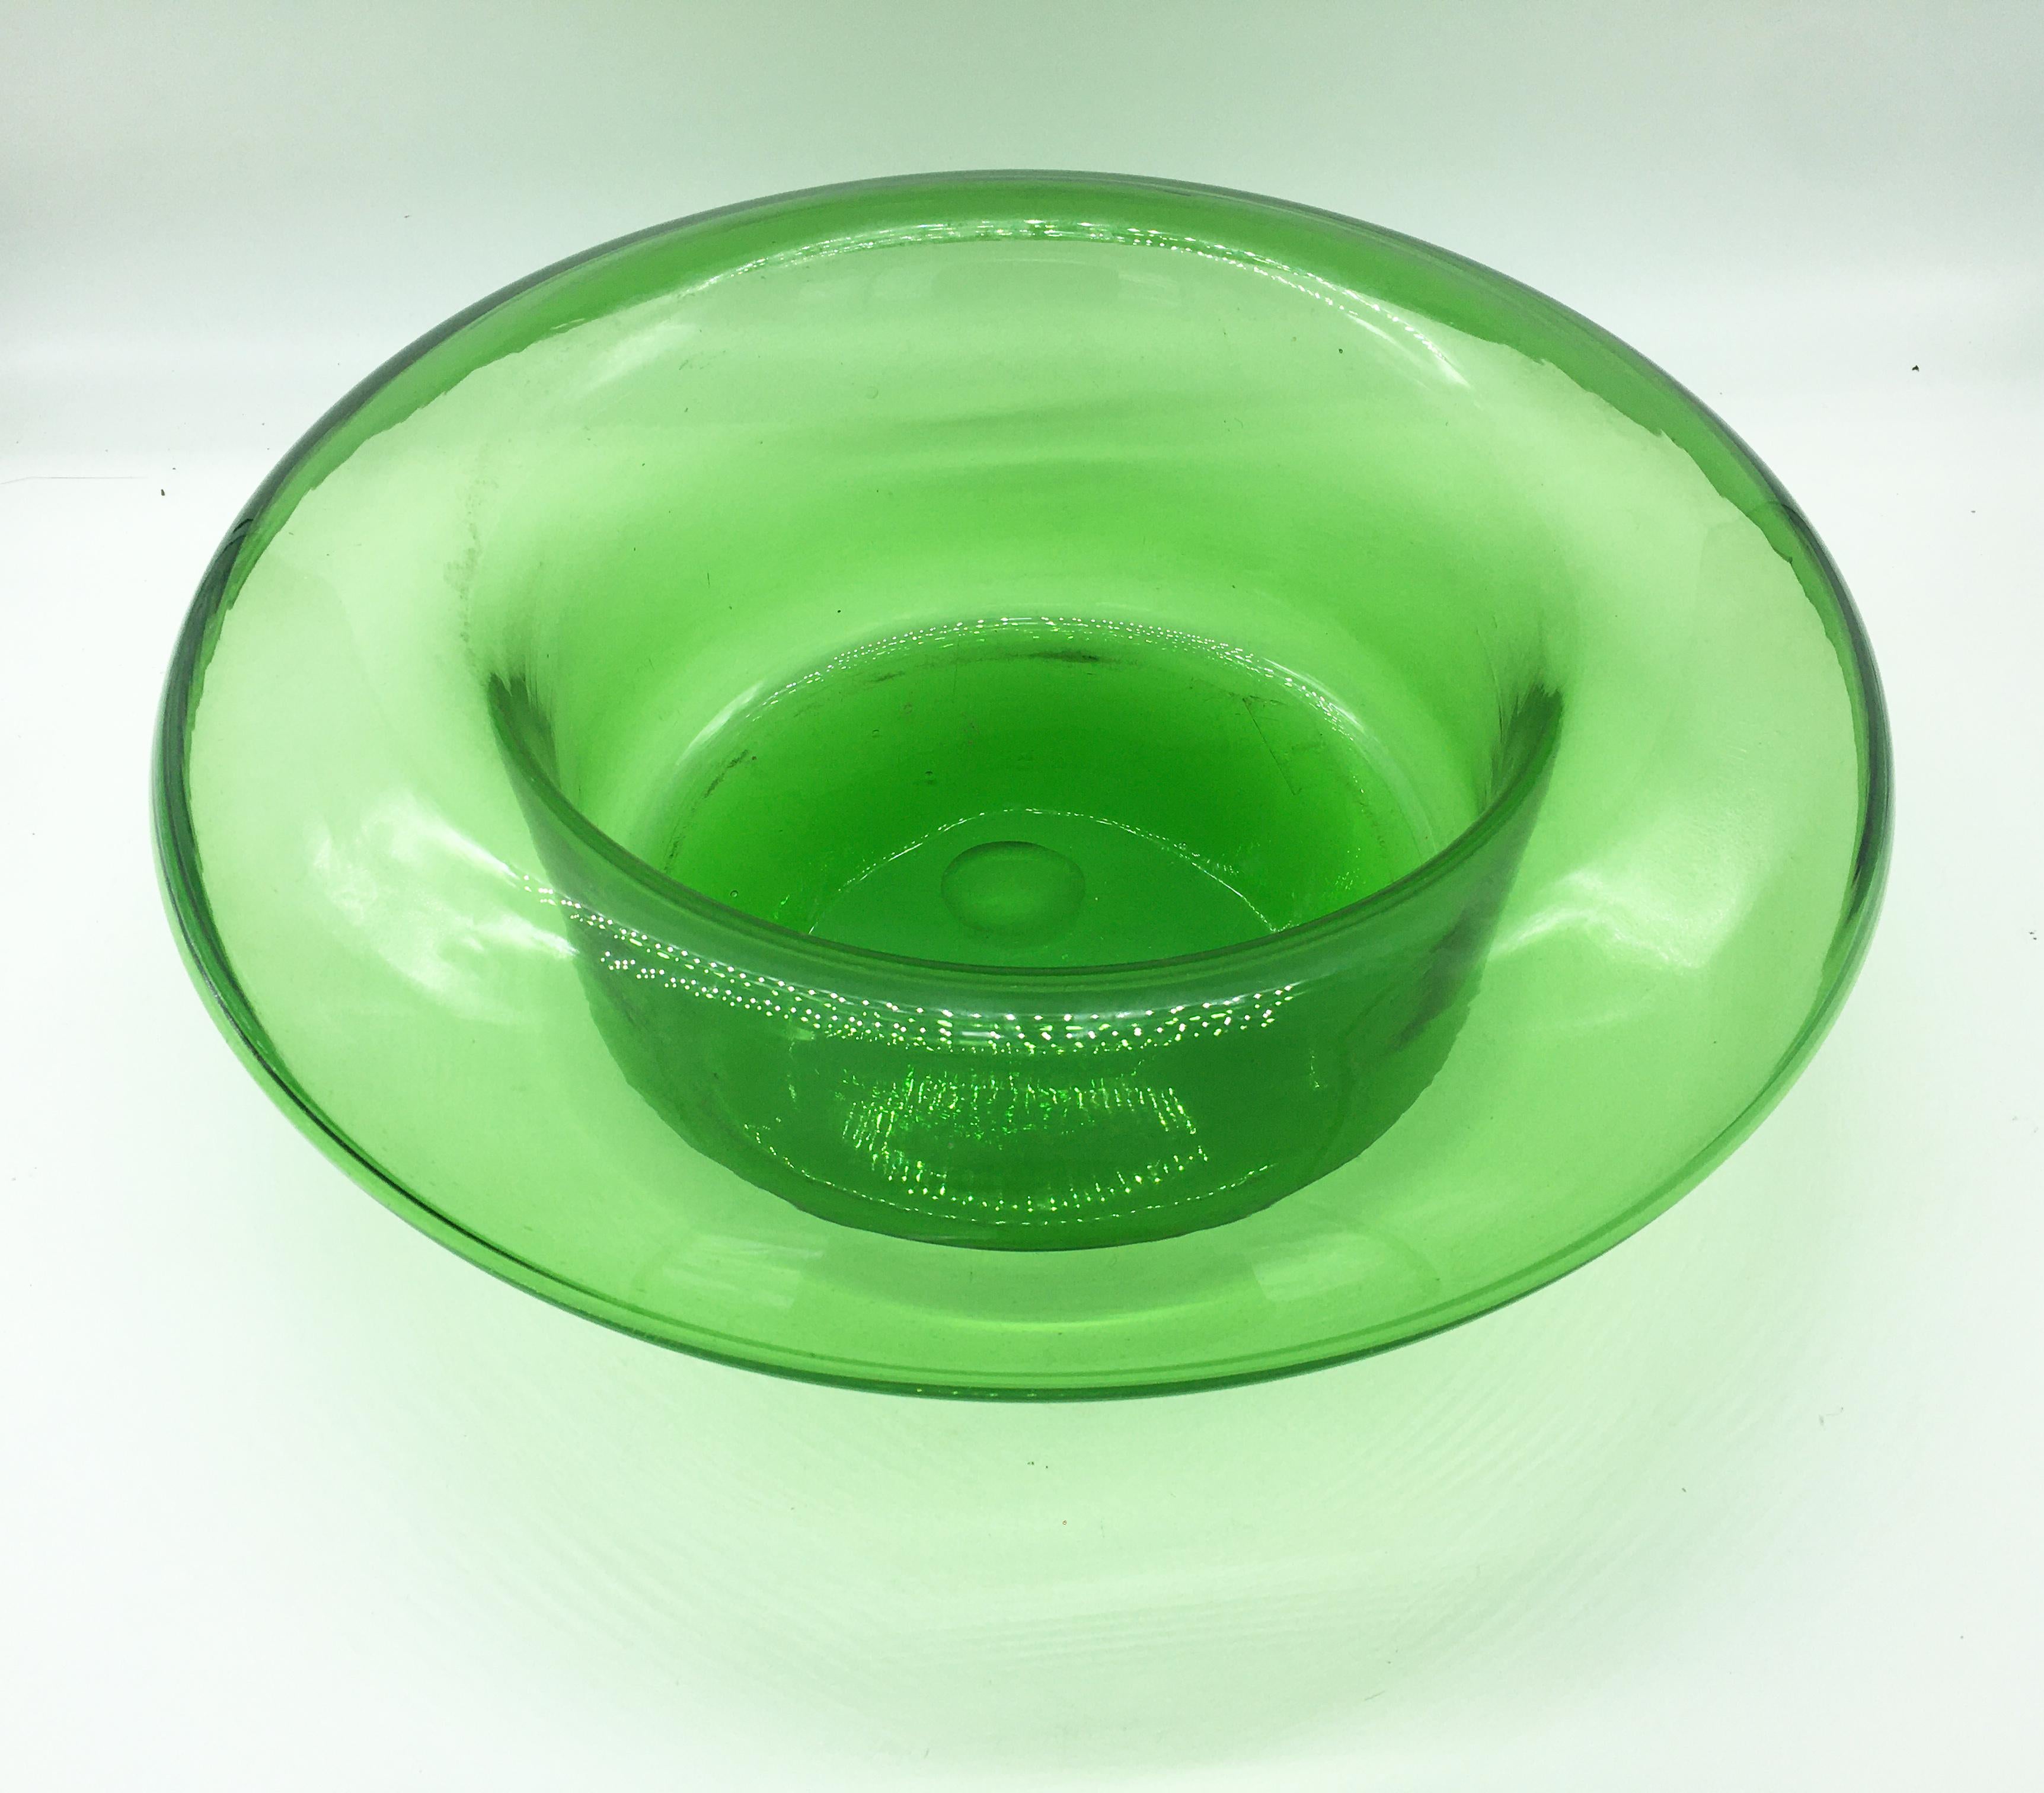 Very nice green hat-shaped Murano glass vessel.
It's in excellent condition, no chips.